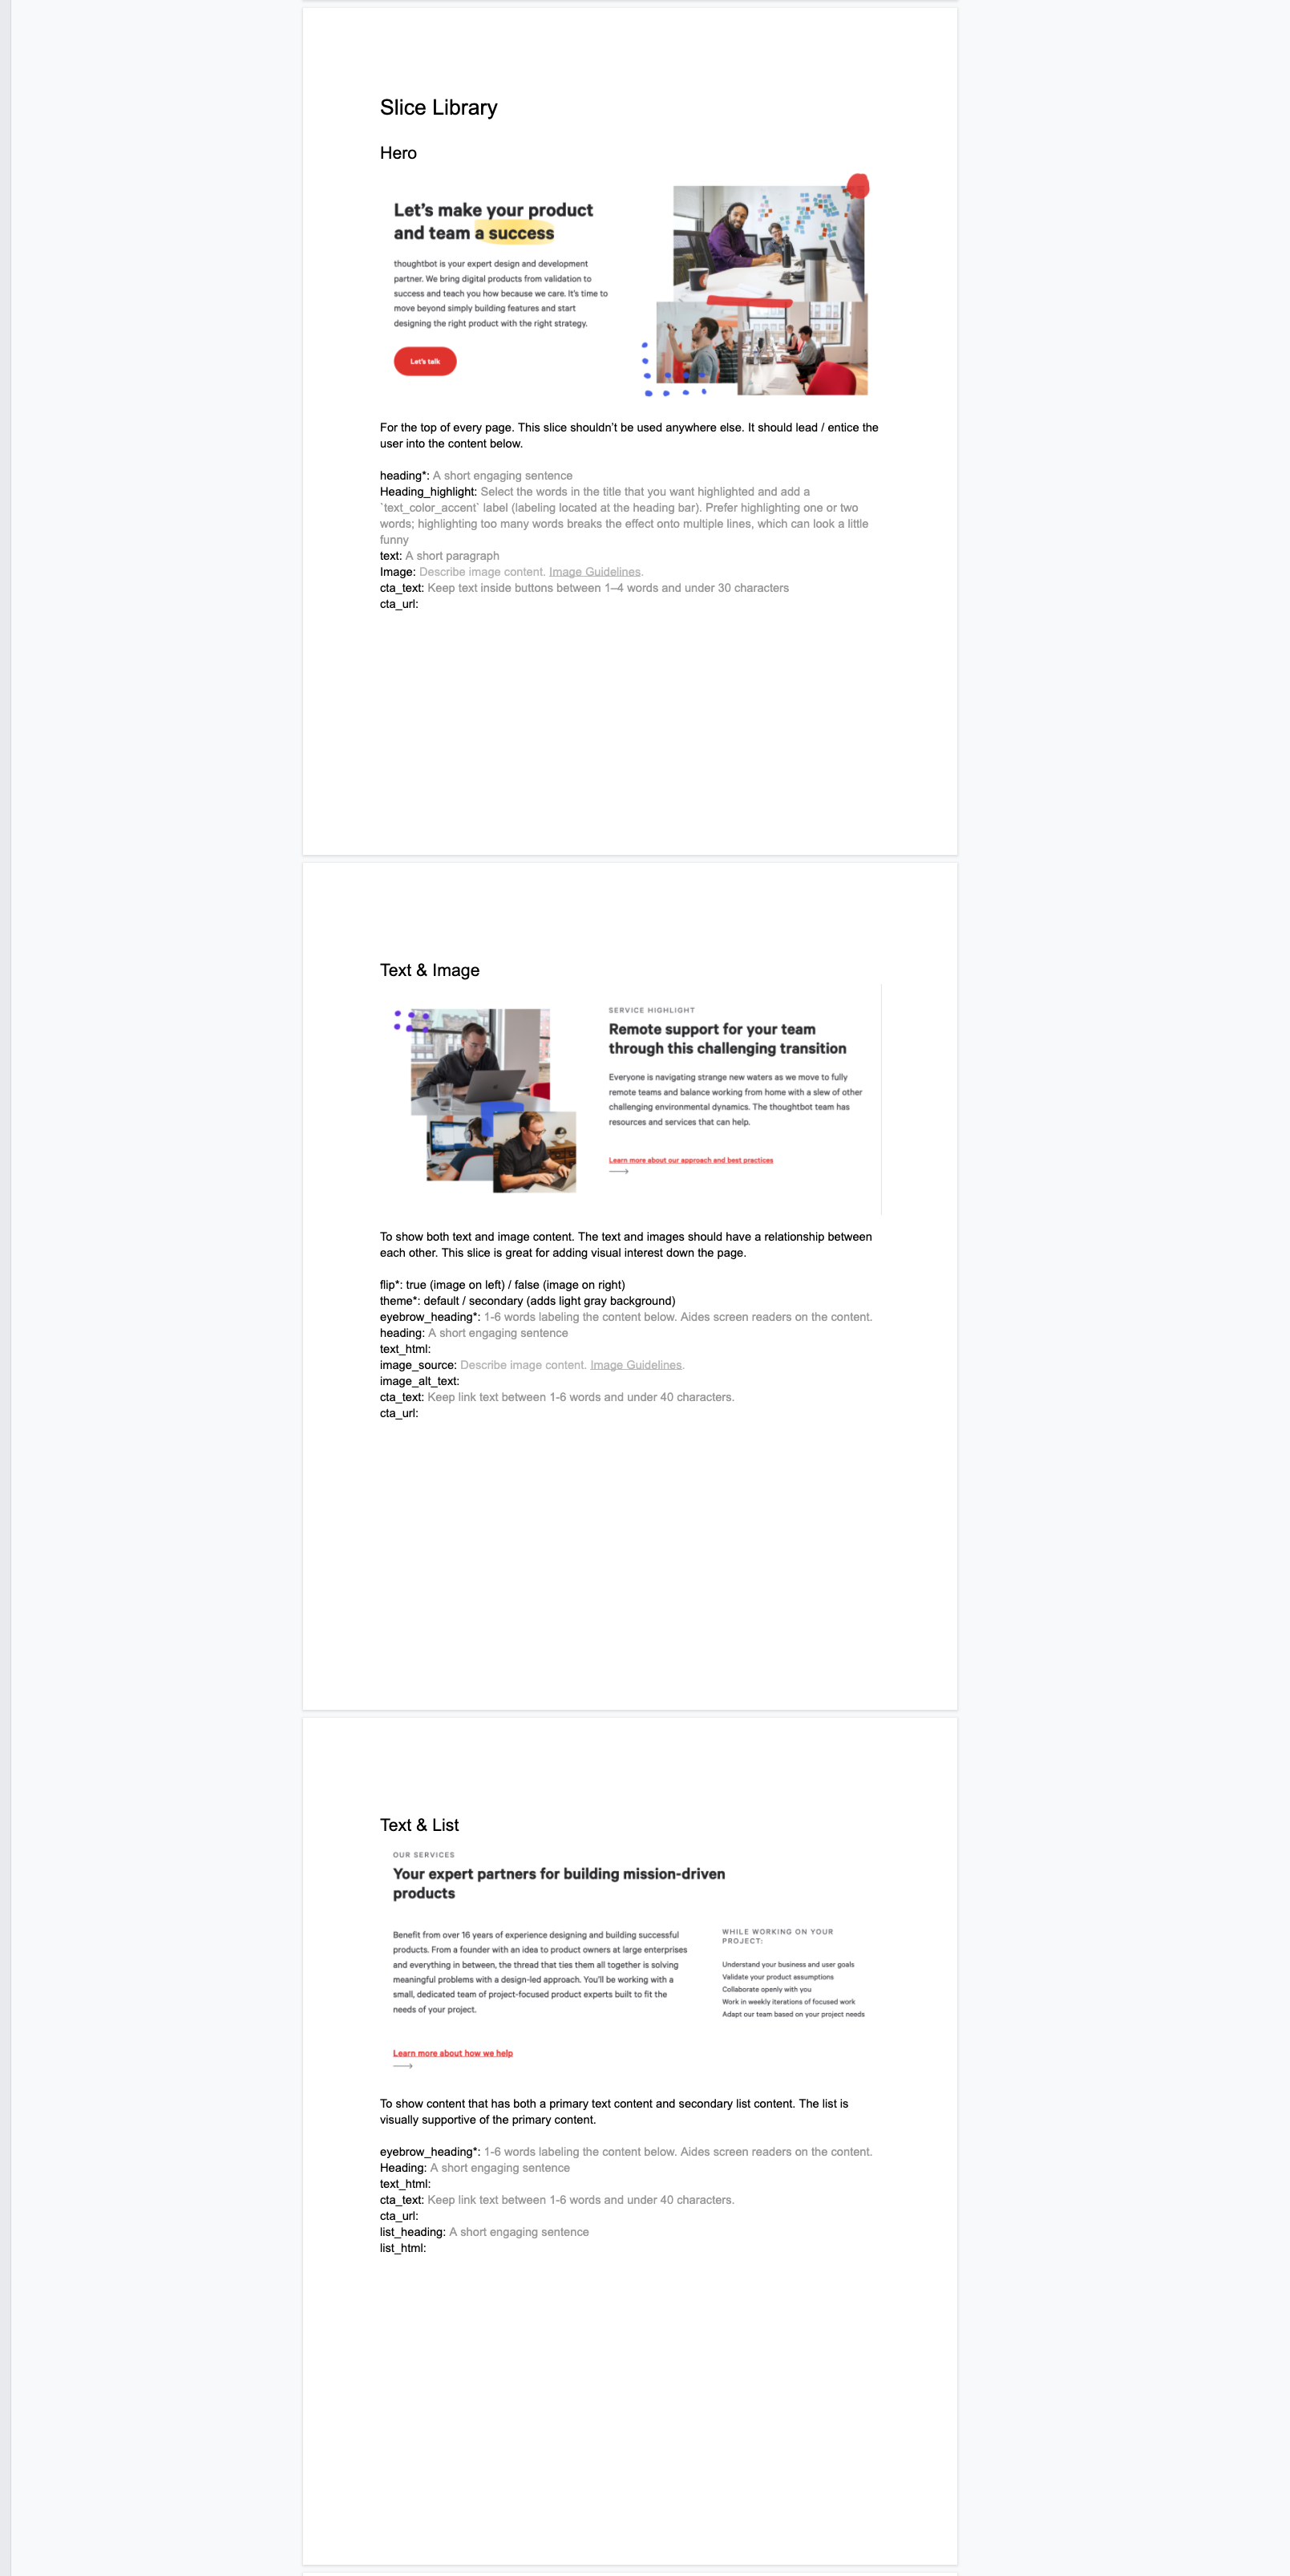 A screenshot of a few of the slice documentation for the Marketing team